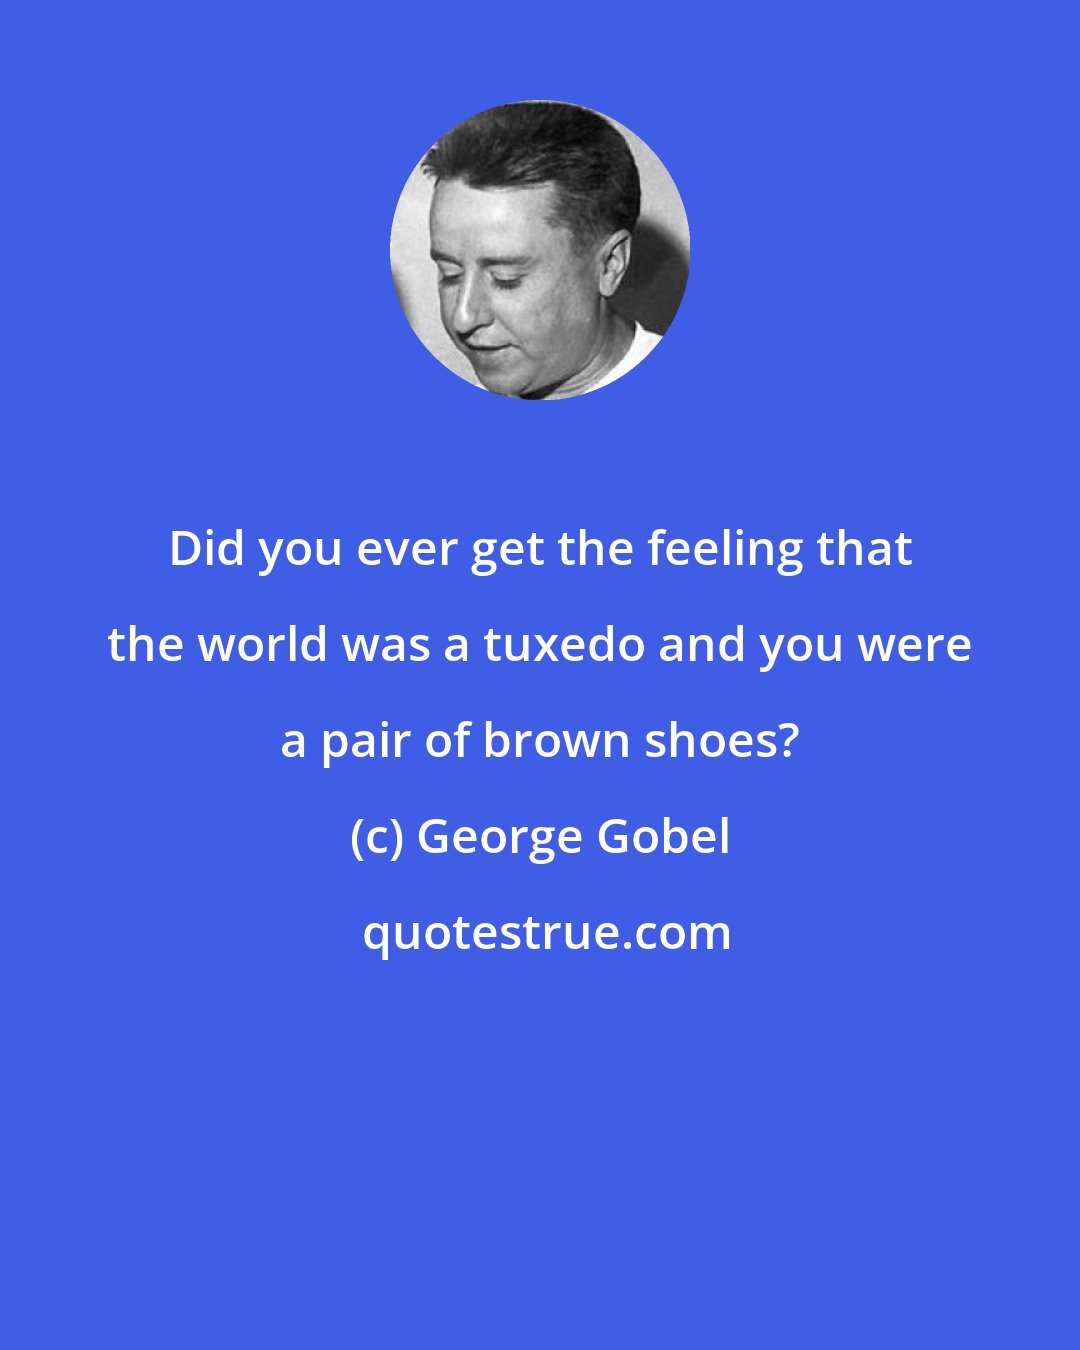 George Gobel: Did you ever get the feeling that the world was a tuxedo and you were a pair of brown shoes?